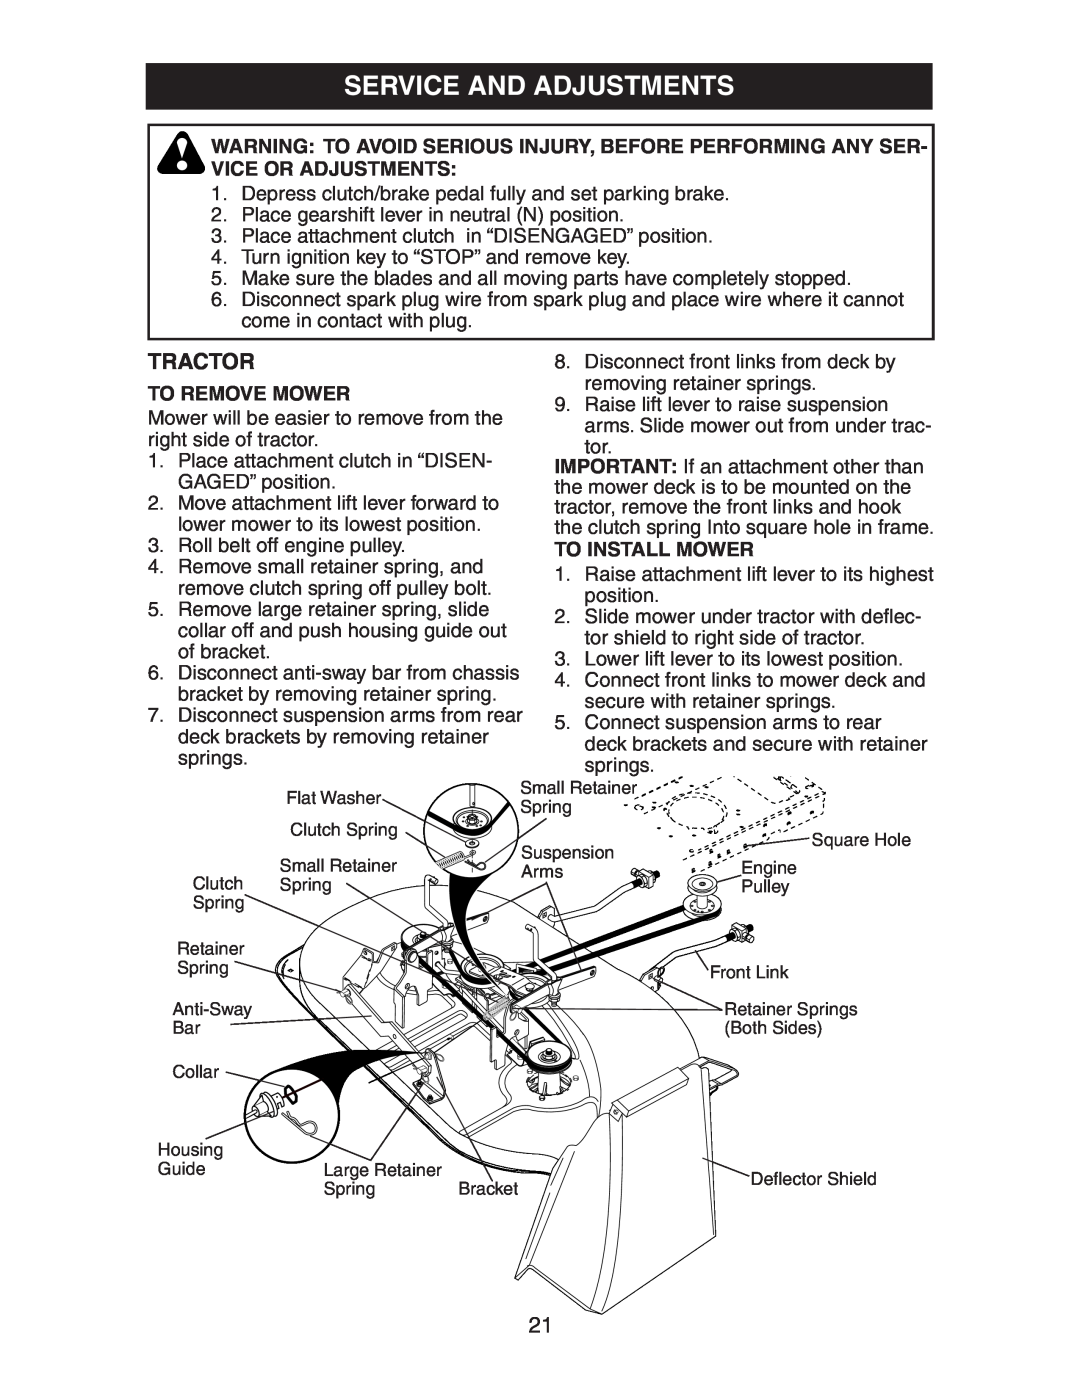 Electrolux AG15538B manual Service And Adjustments, To Remove Mower, To Install Mower, Tractor 